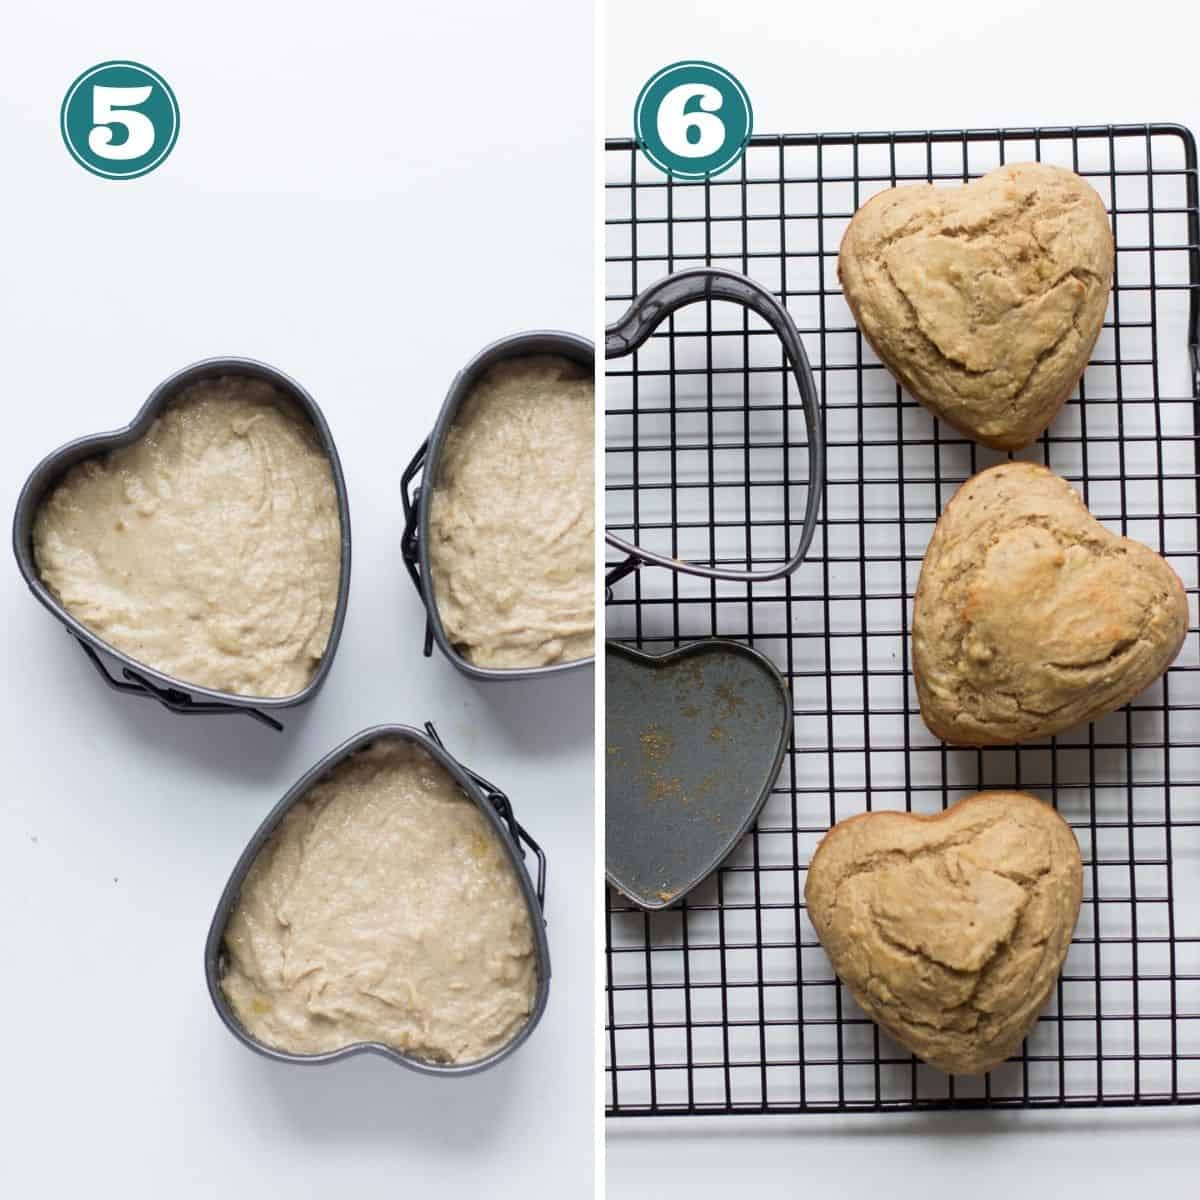 a two image collage showing unbaked cake on the left and baked on the right.